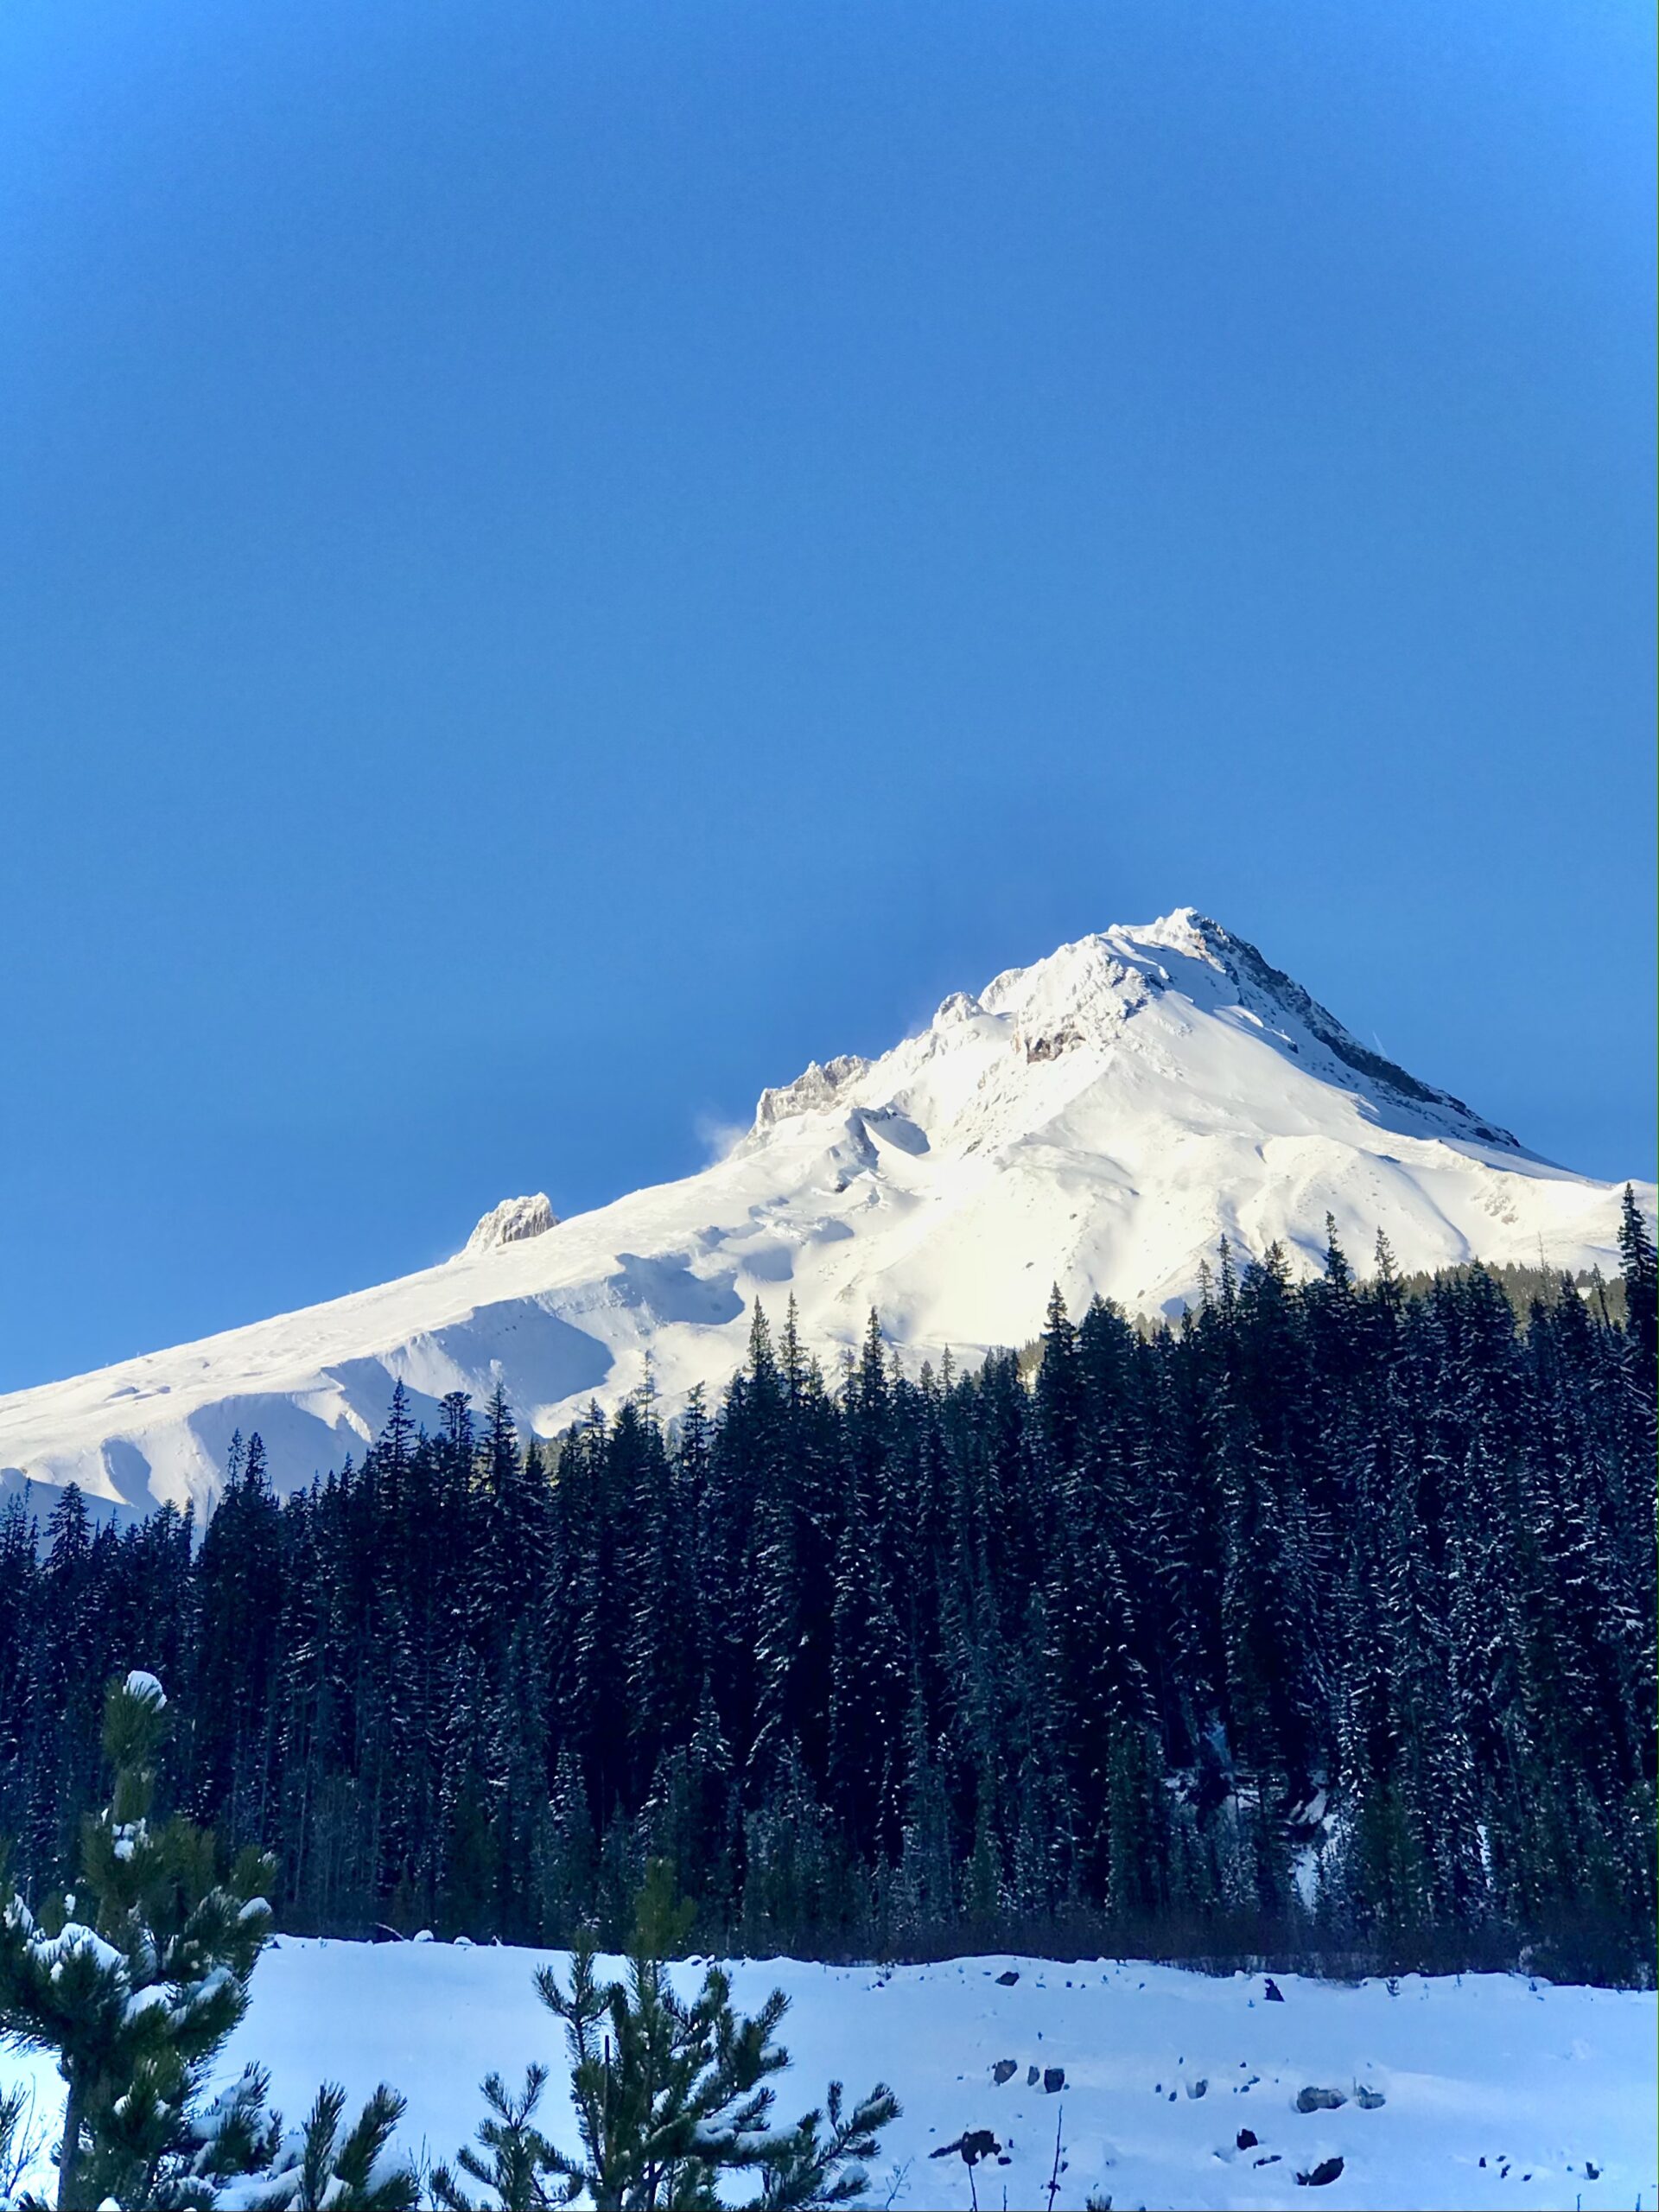 a view of the mountain wyeast, or mount hood, against blue sky and with snow both in the peak of the mountain and the foreground. in the mid-distance is a diagonal line of Douglas fir trees